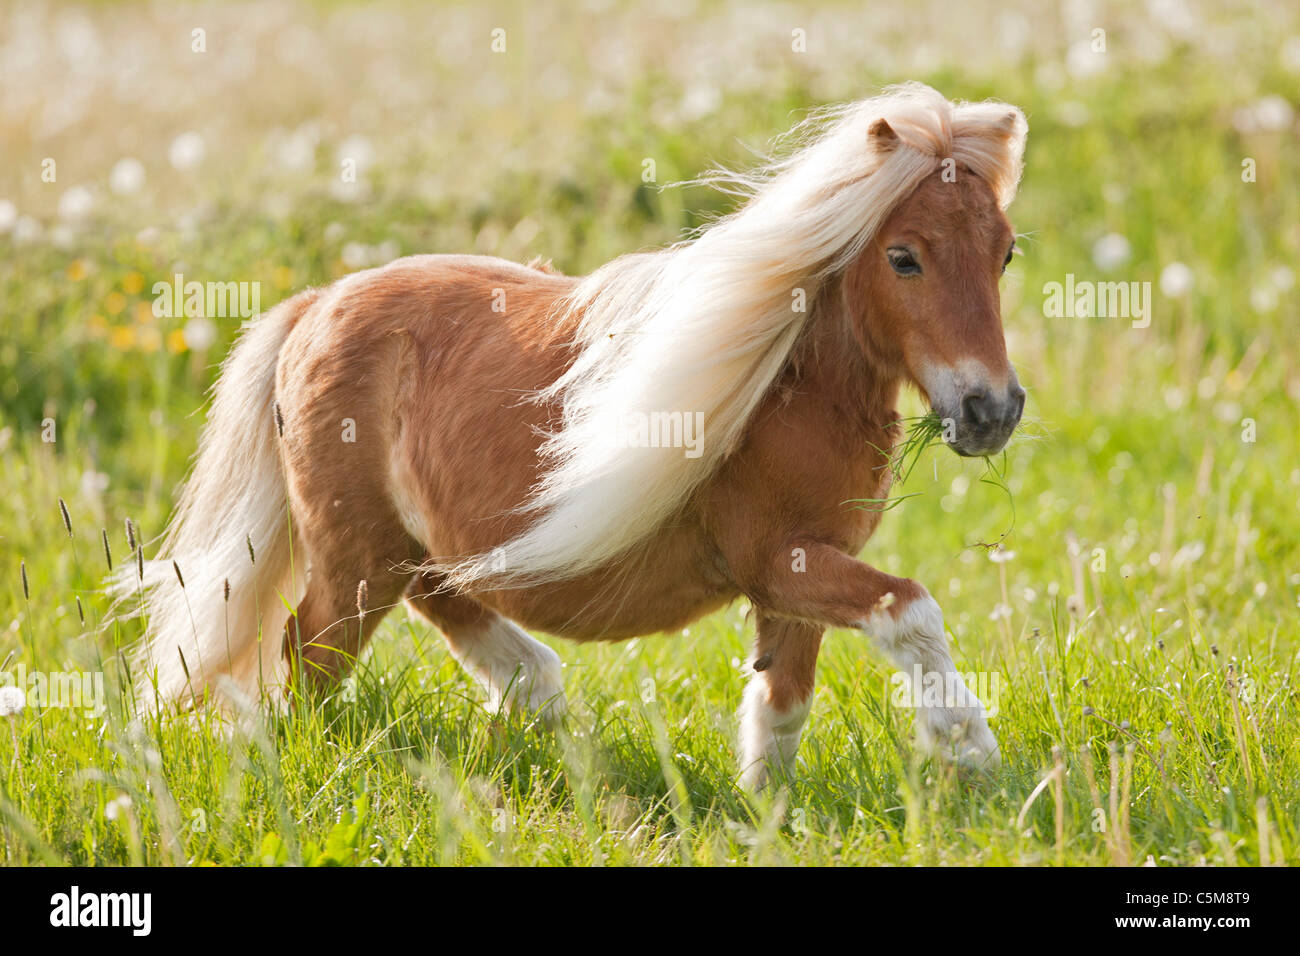 Falabella miniature horse. Chestnut gelding trotting on a meadow Stock Photo